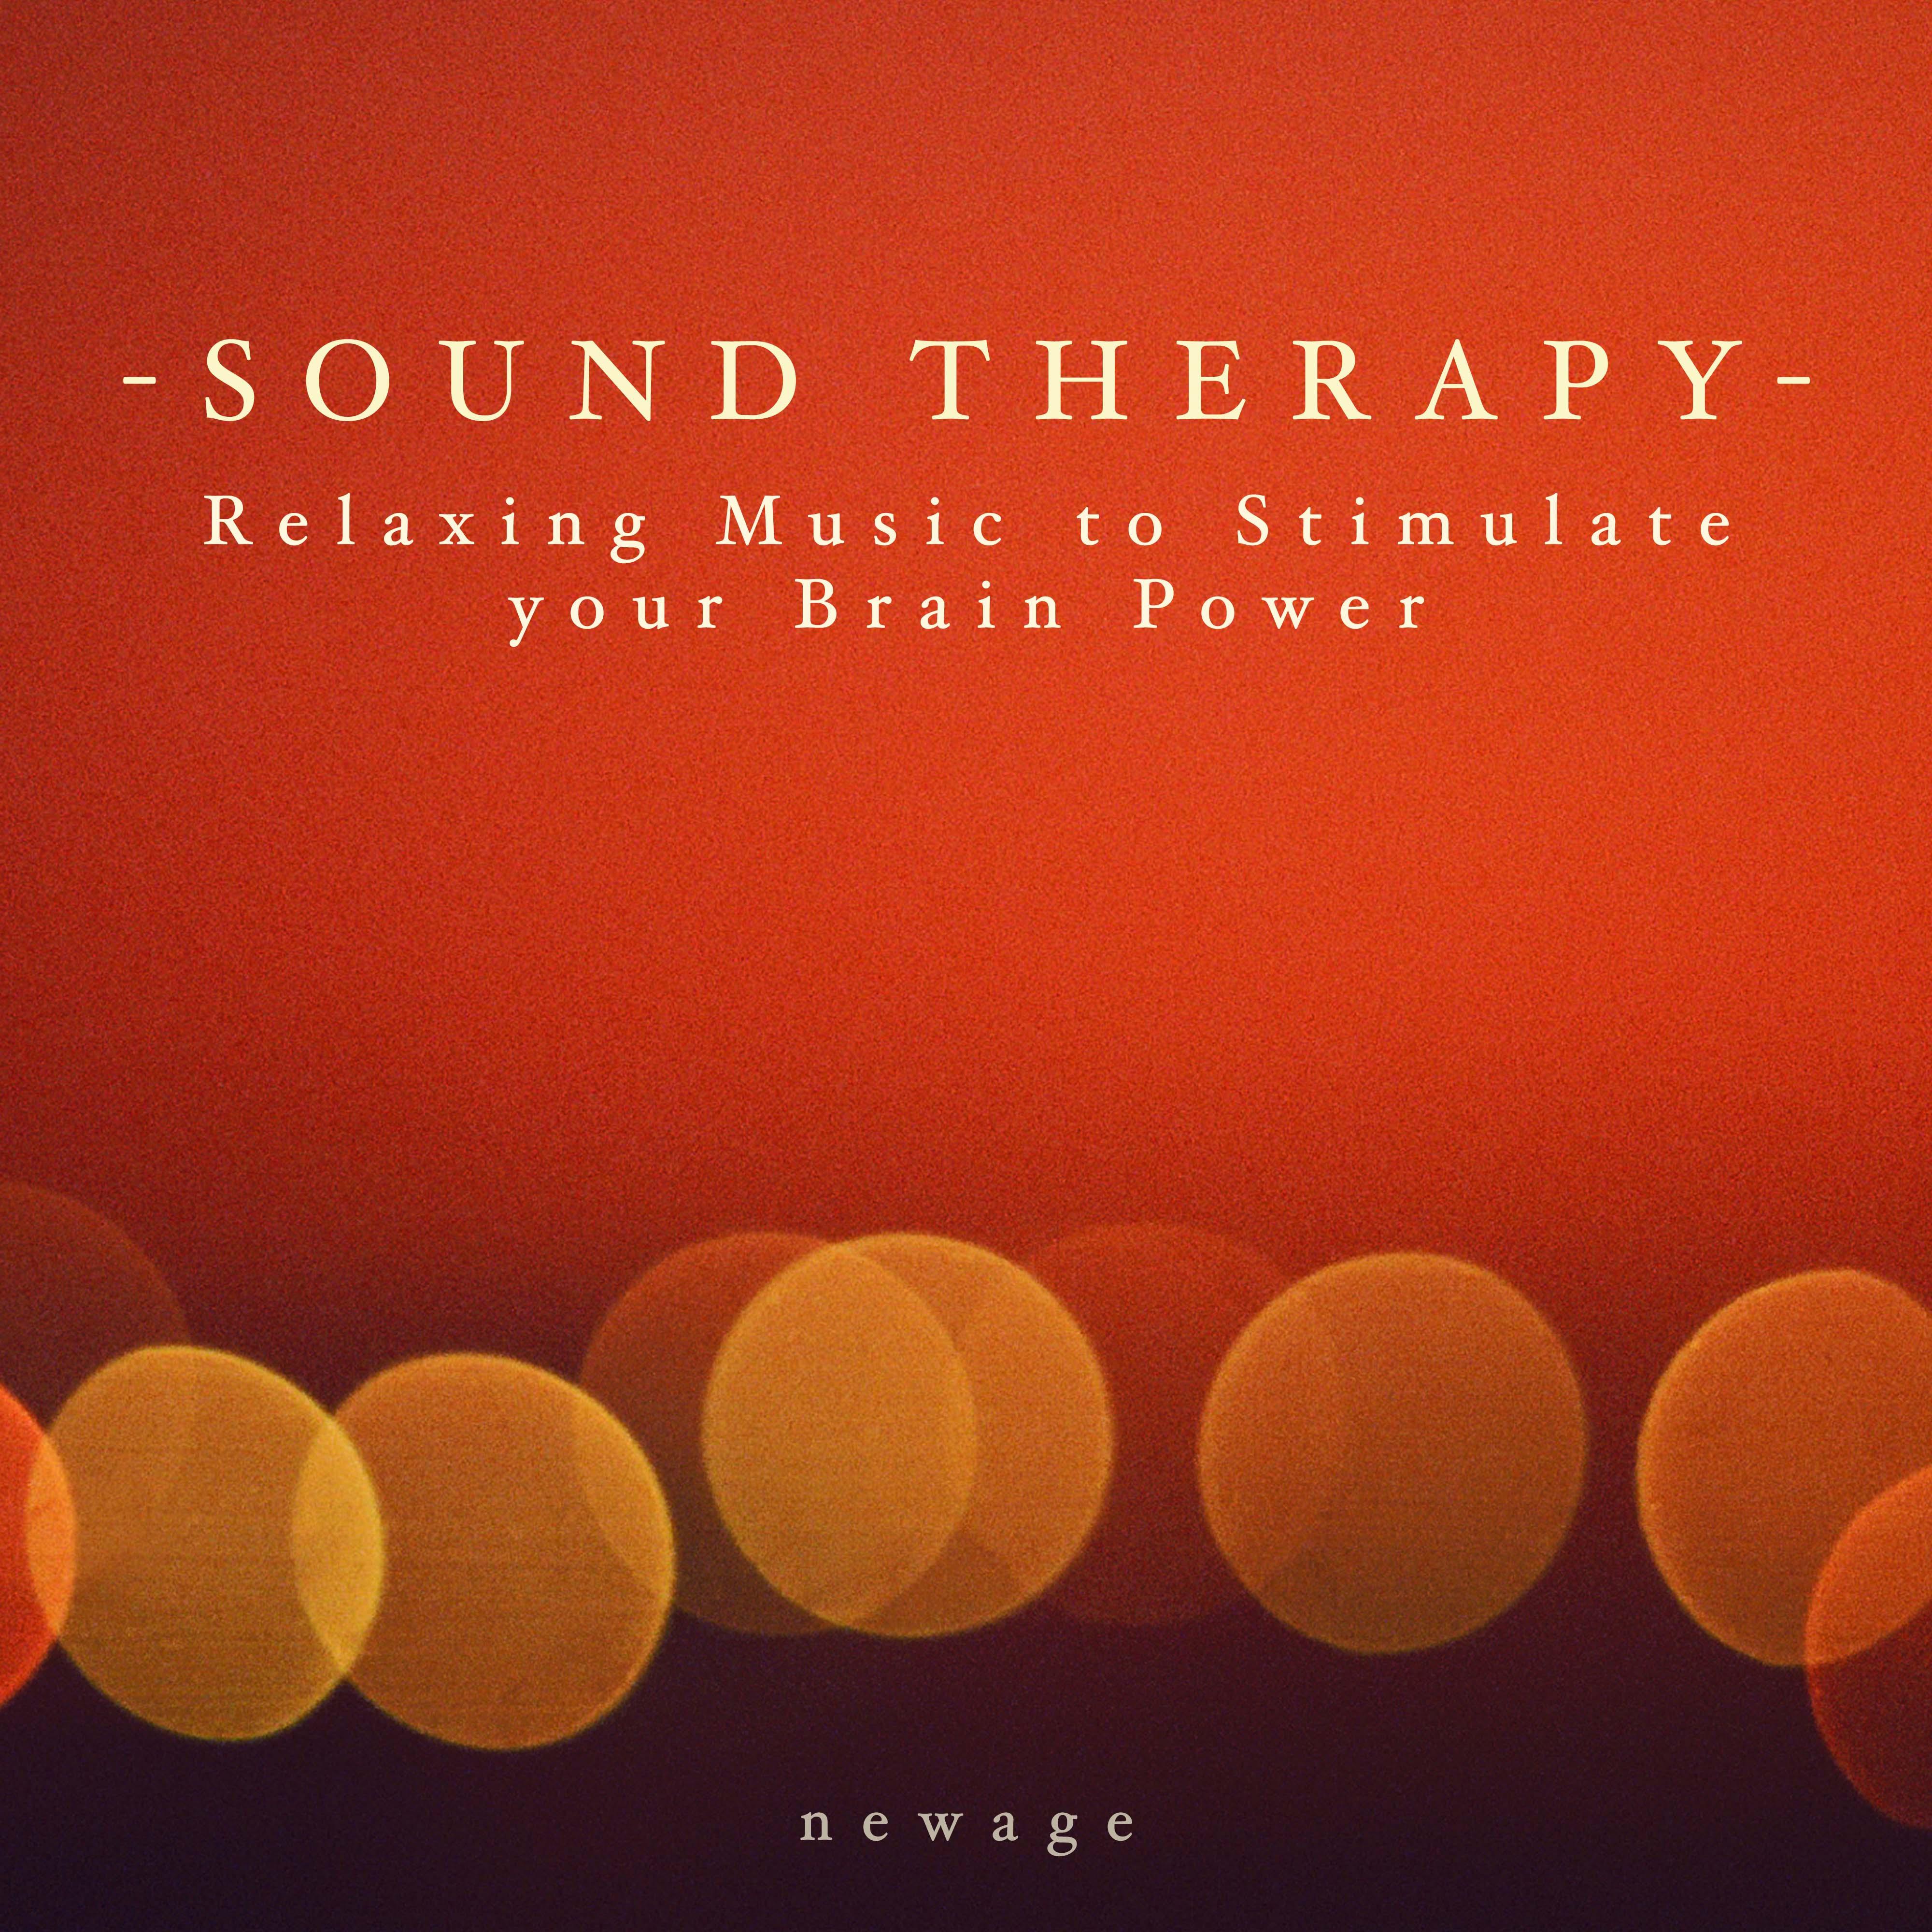 Sound Therapy - Relaxing Music to Stimulate your Brain Power and Achieve a Profound Sense of Inner Peace